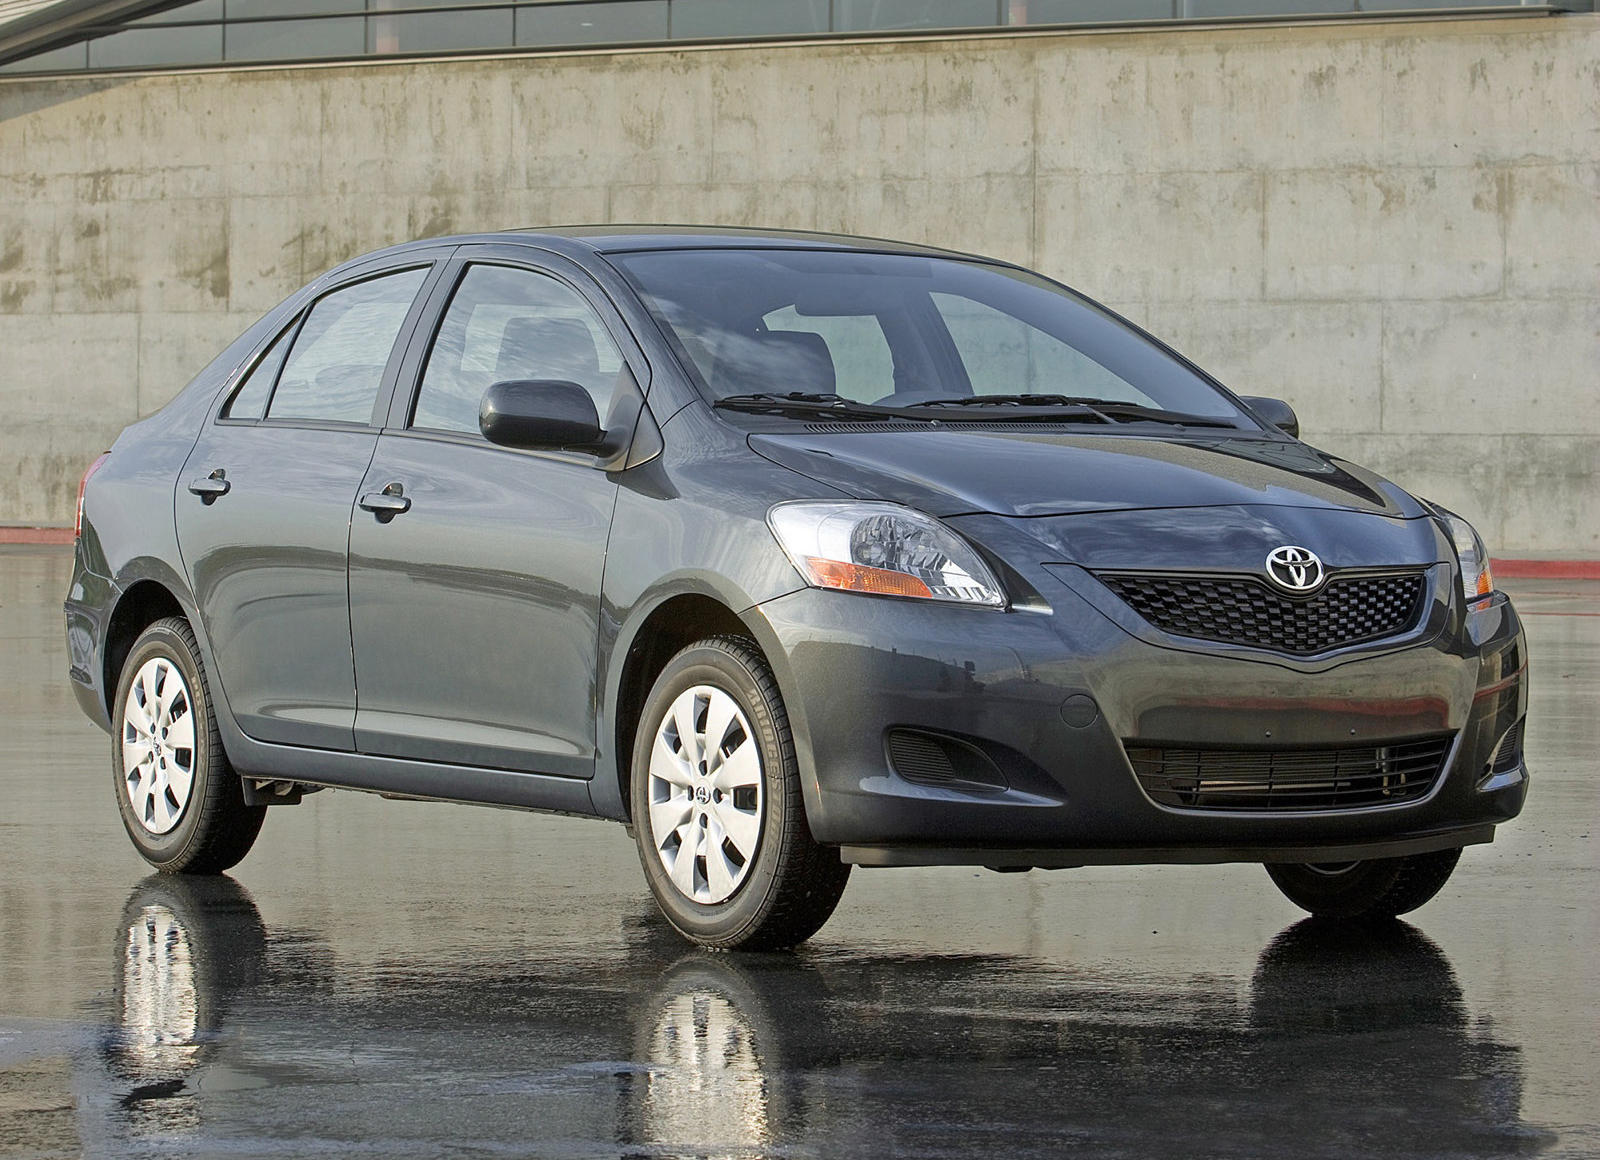 2011 Toyota Yaris Sedan: Review, Trims, Specs, Price, New Interior  Features, Exterior Design, and Specifications | CarBuzz